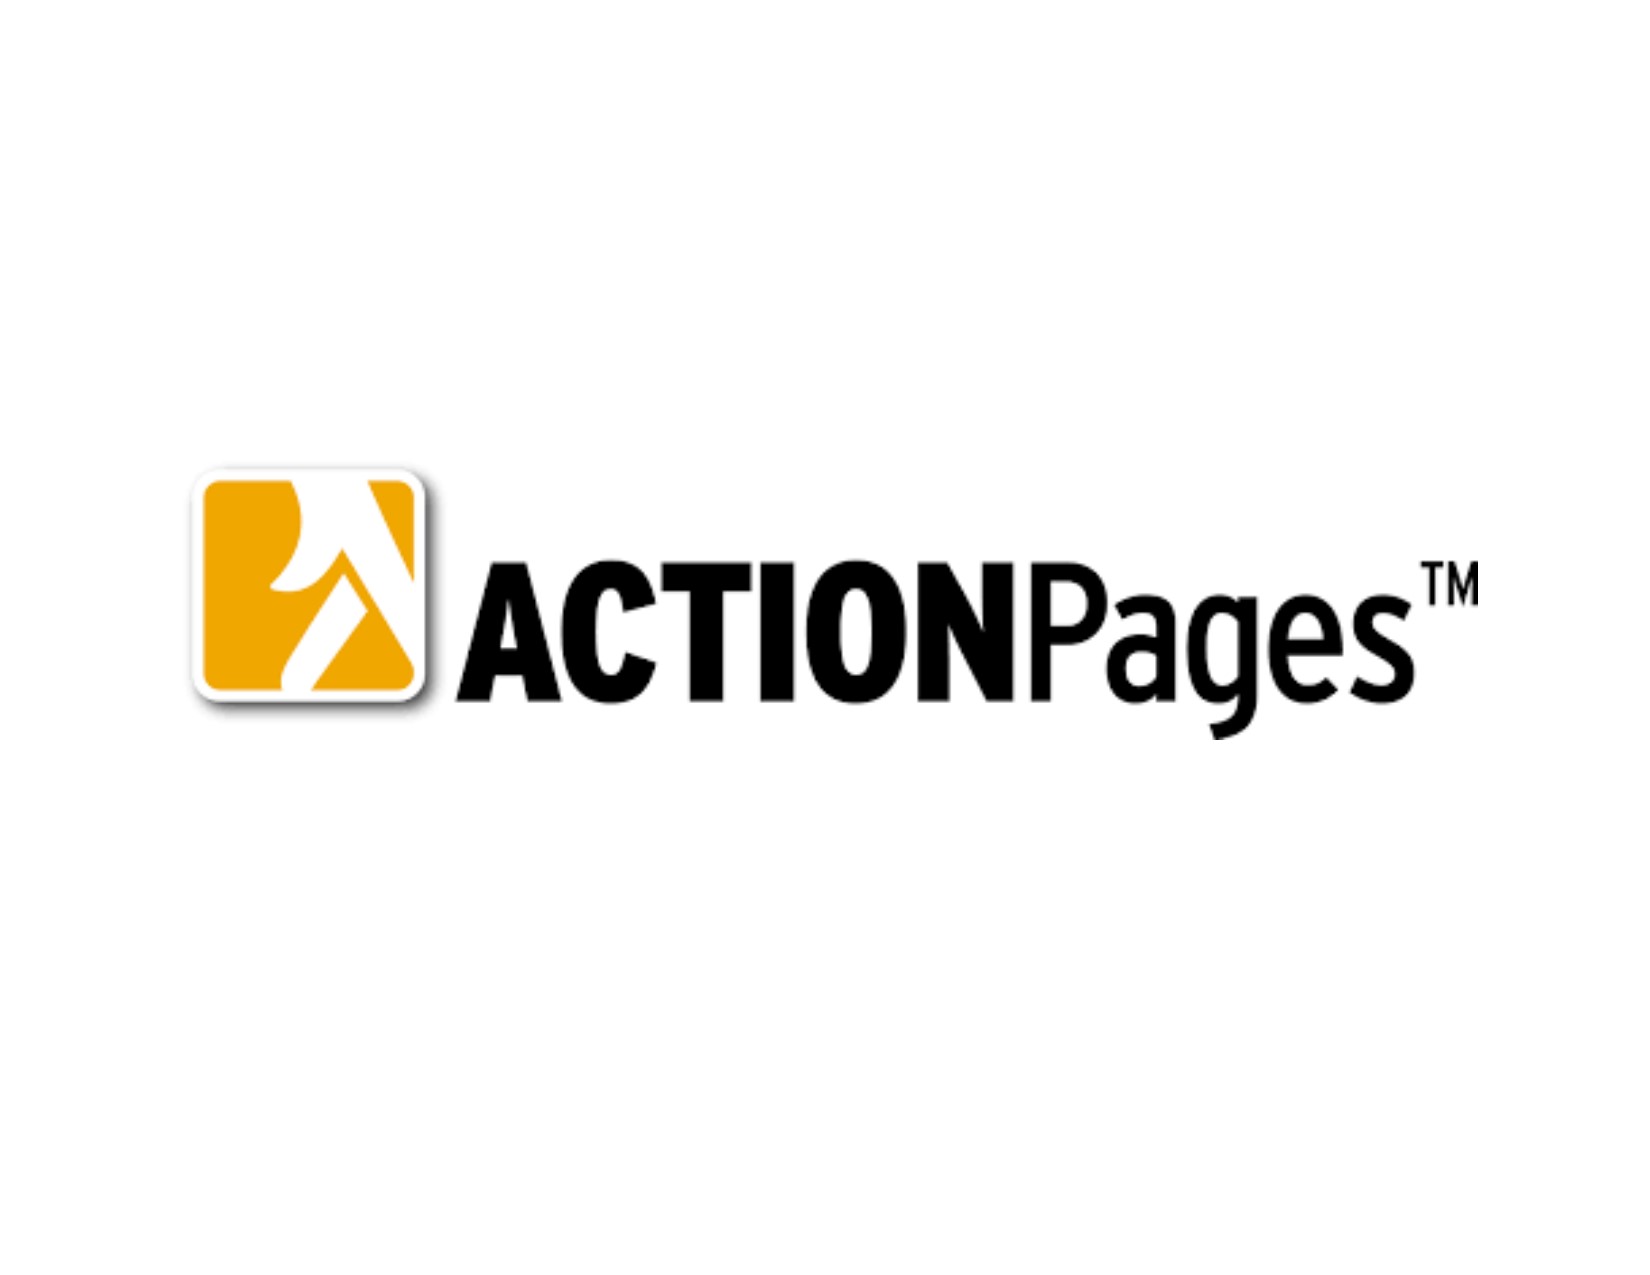 ActionPages